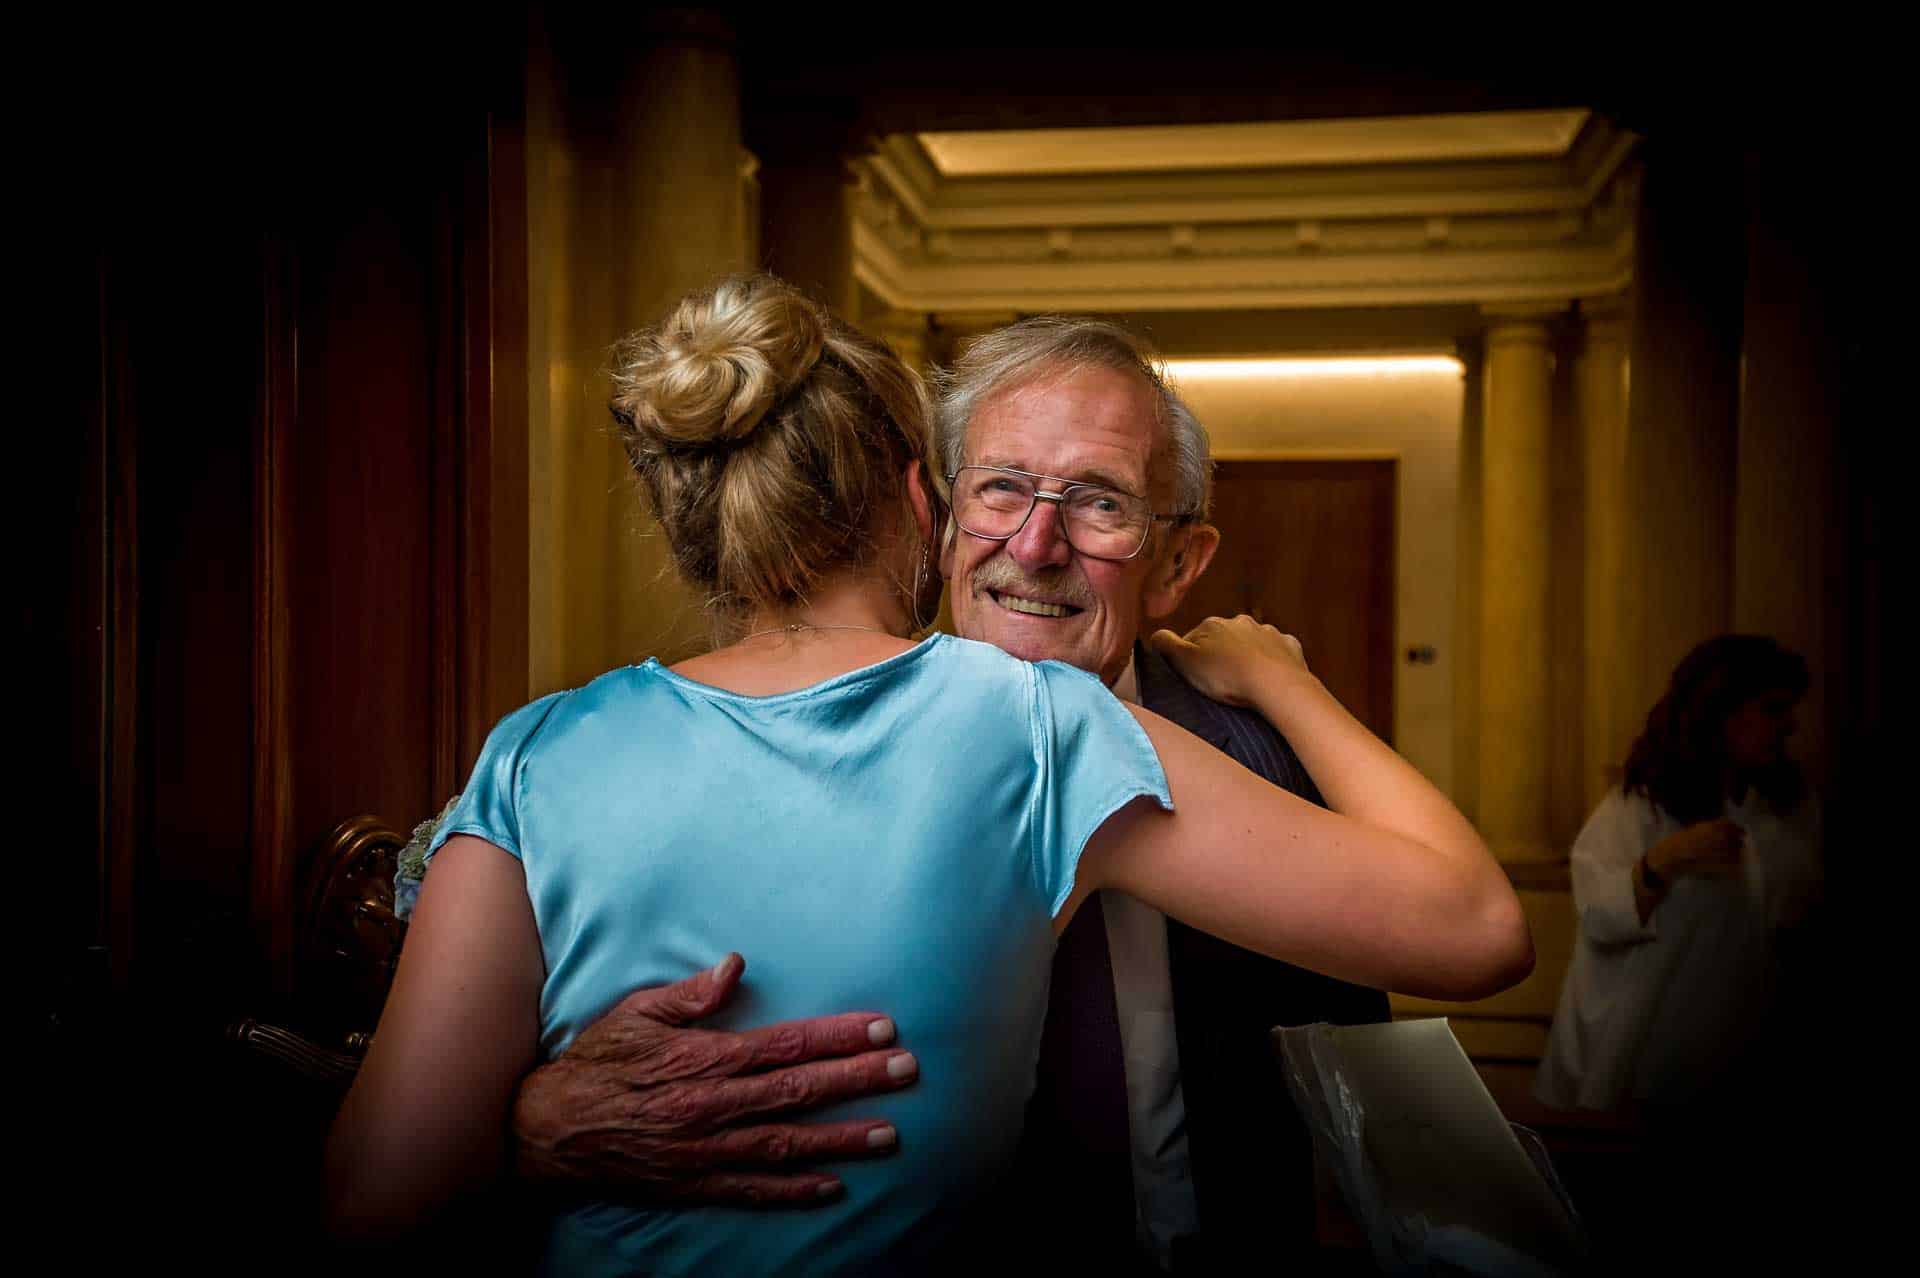 Bridesmaid with back to camera hugs elderly male relative who is smiling at the photographer